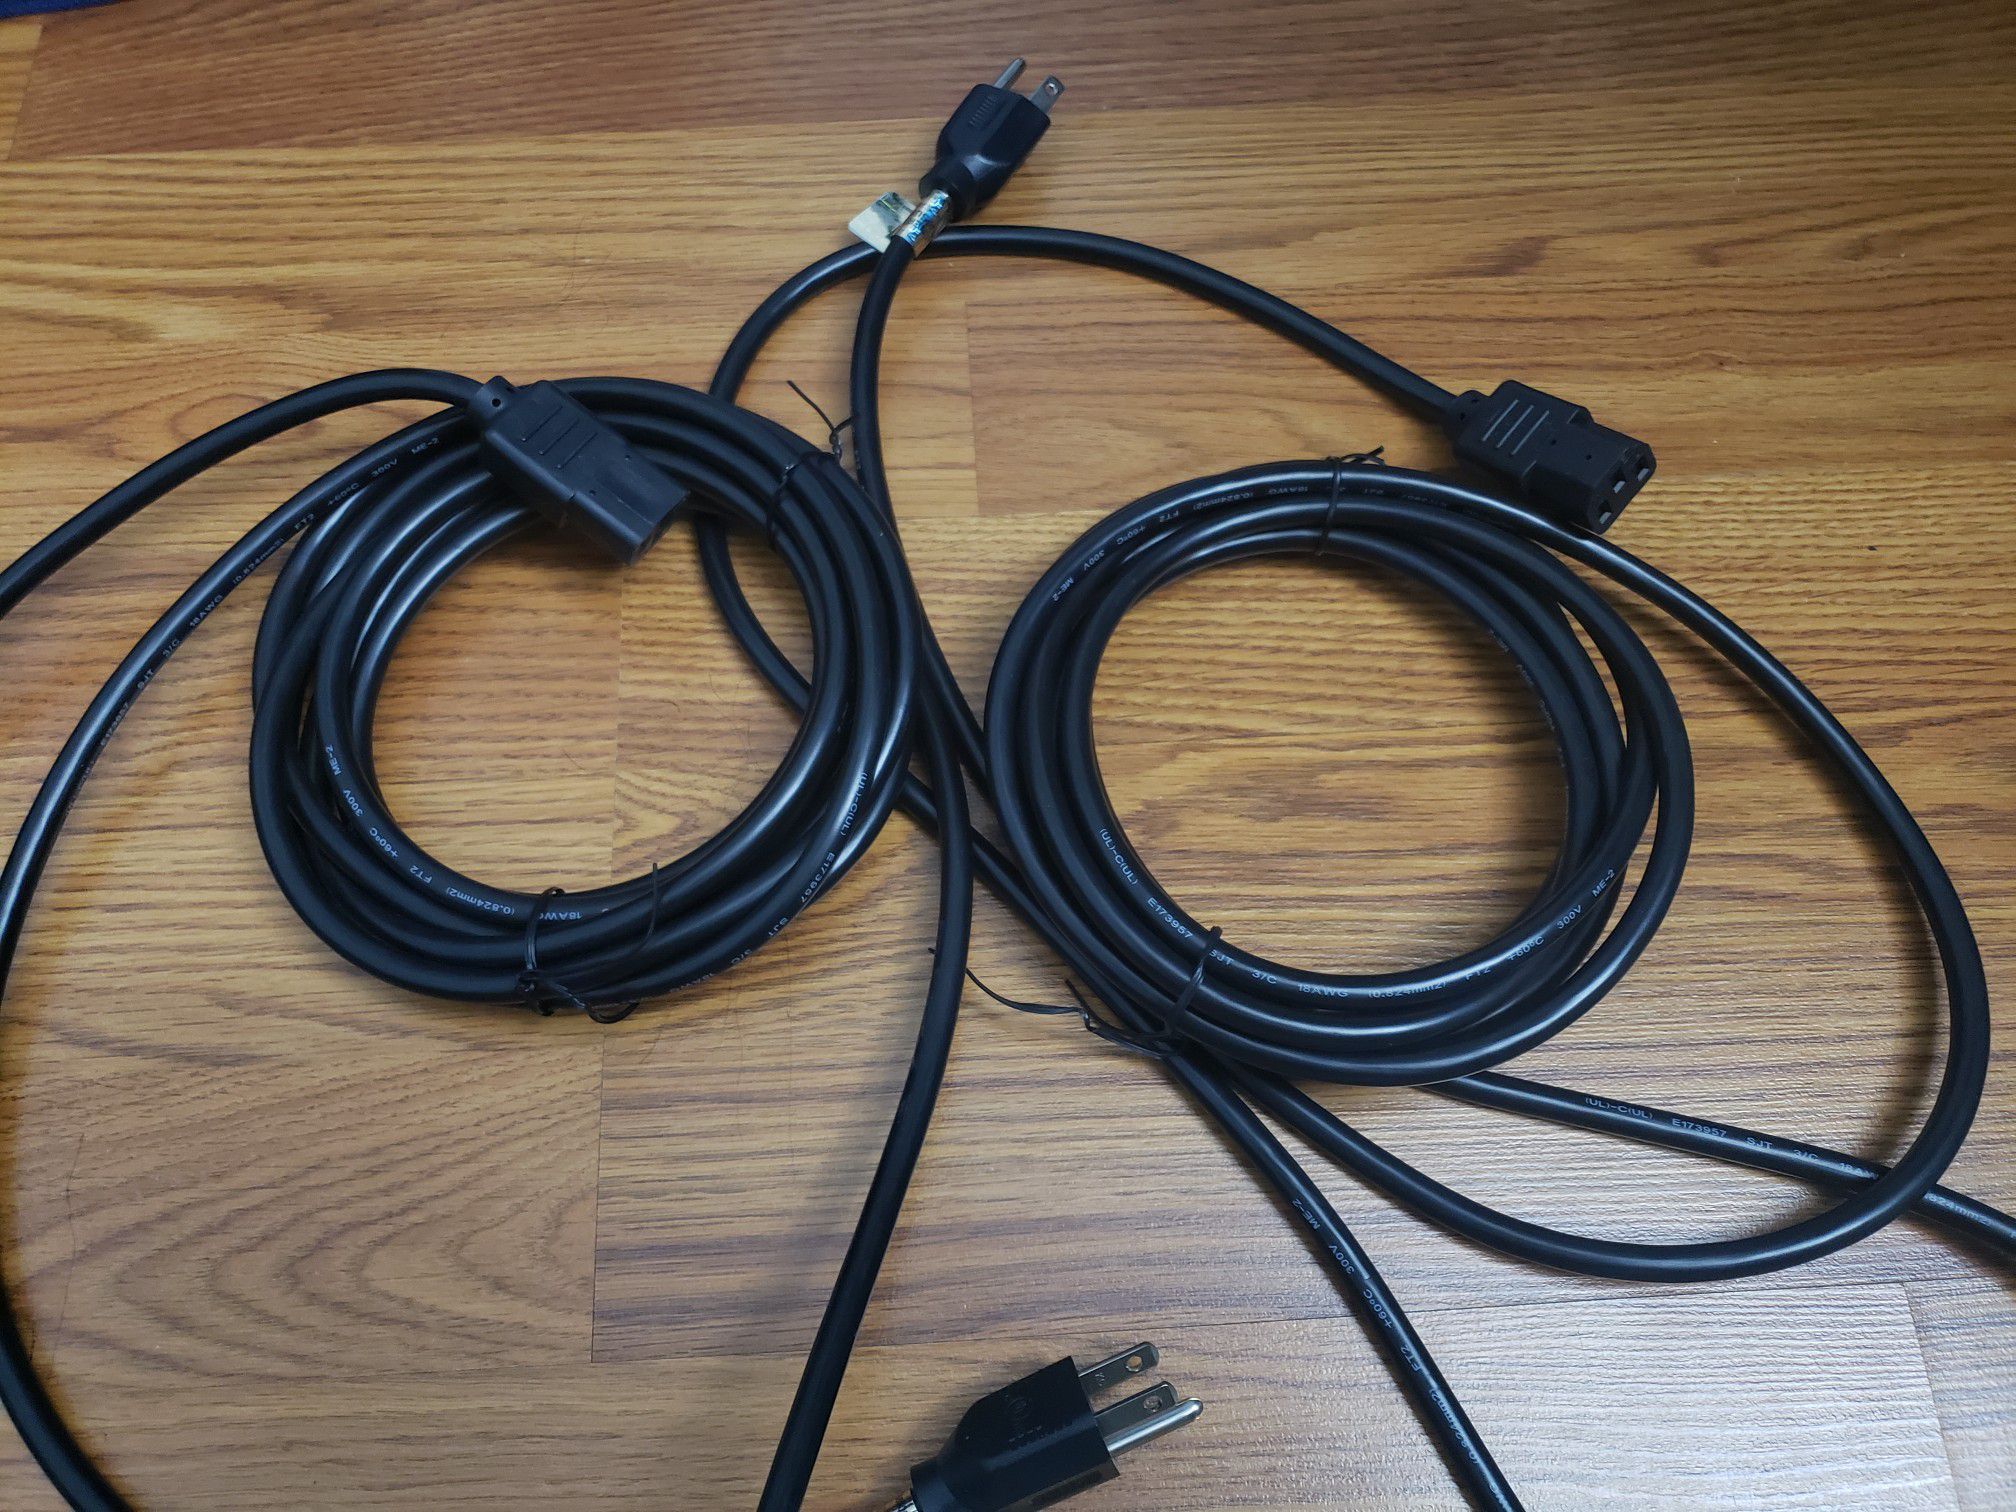 Monitor power cables